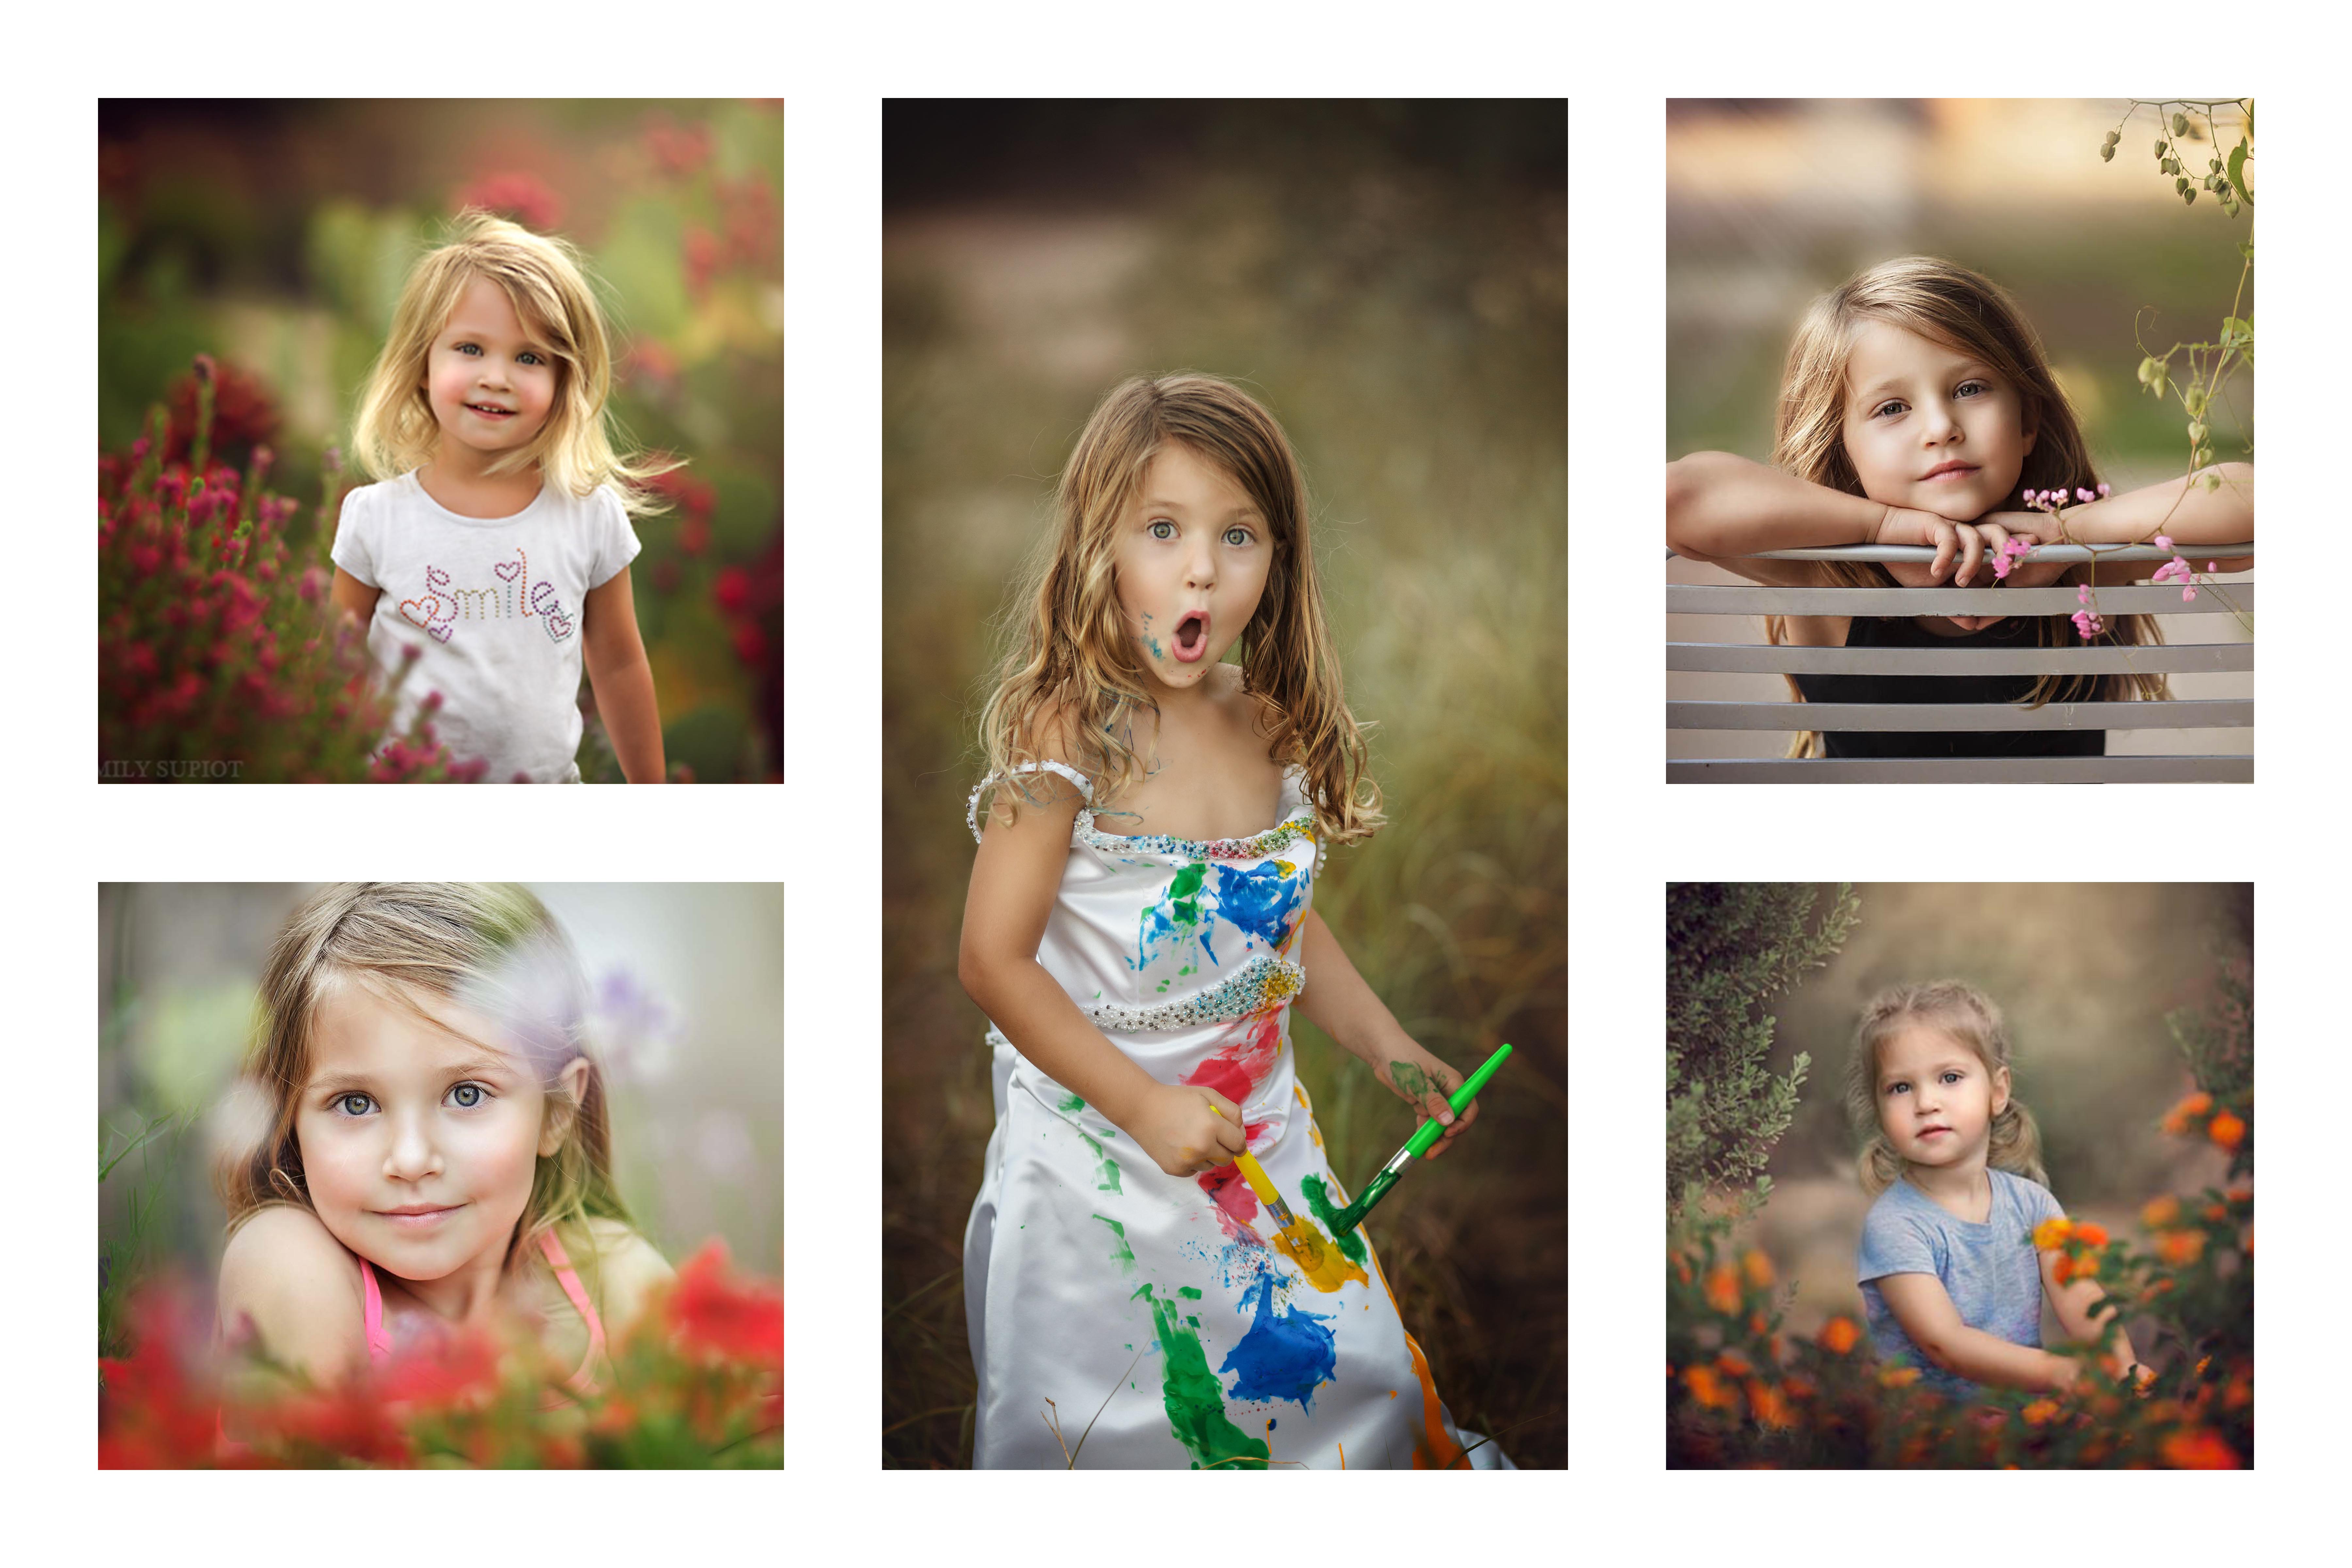 How To create a photo collage in photoshop Super easy way to make a photo collage plus free templates and video tutorial!